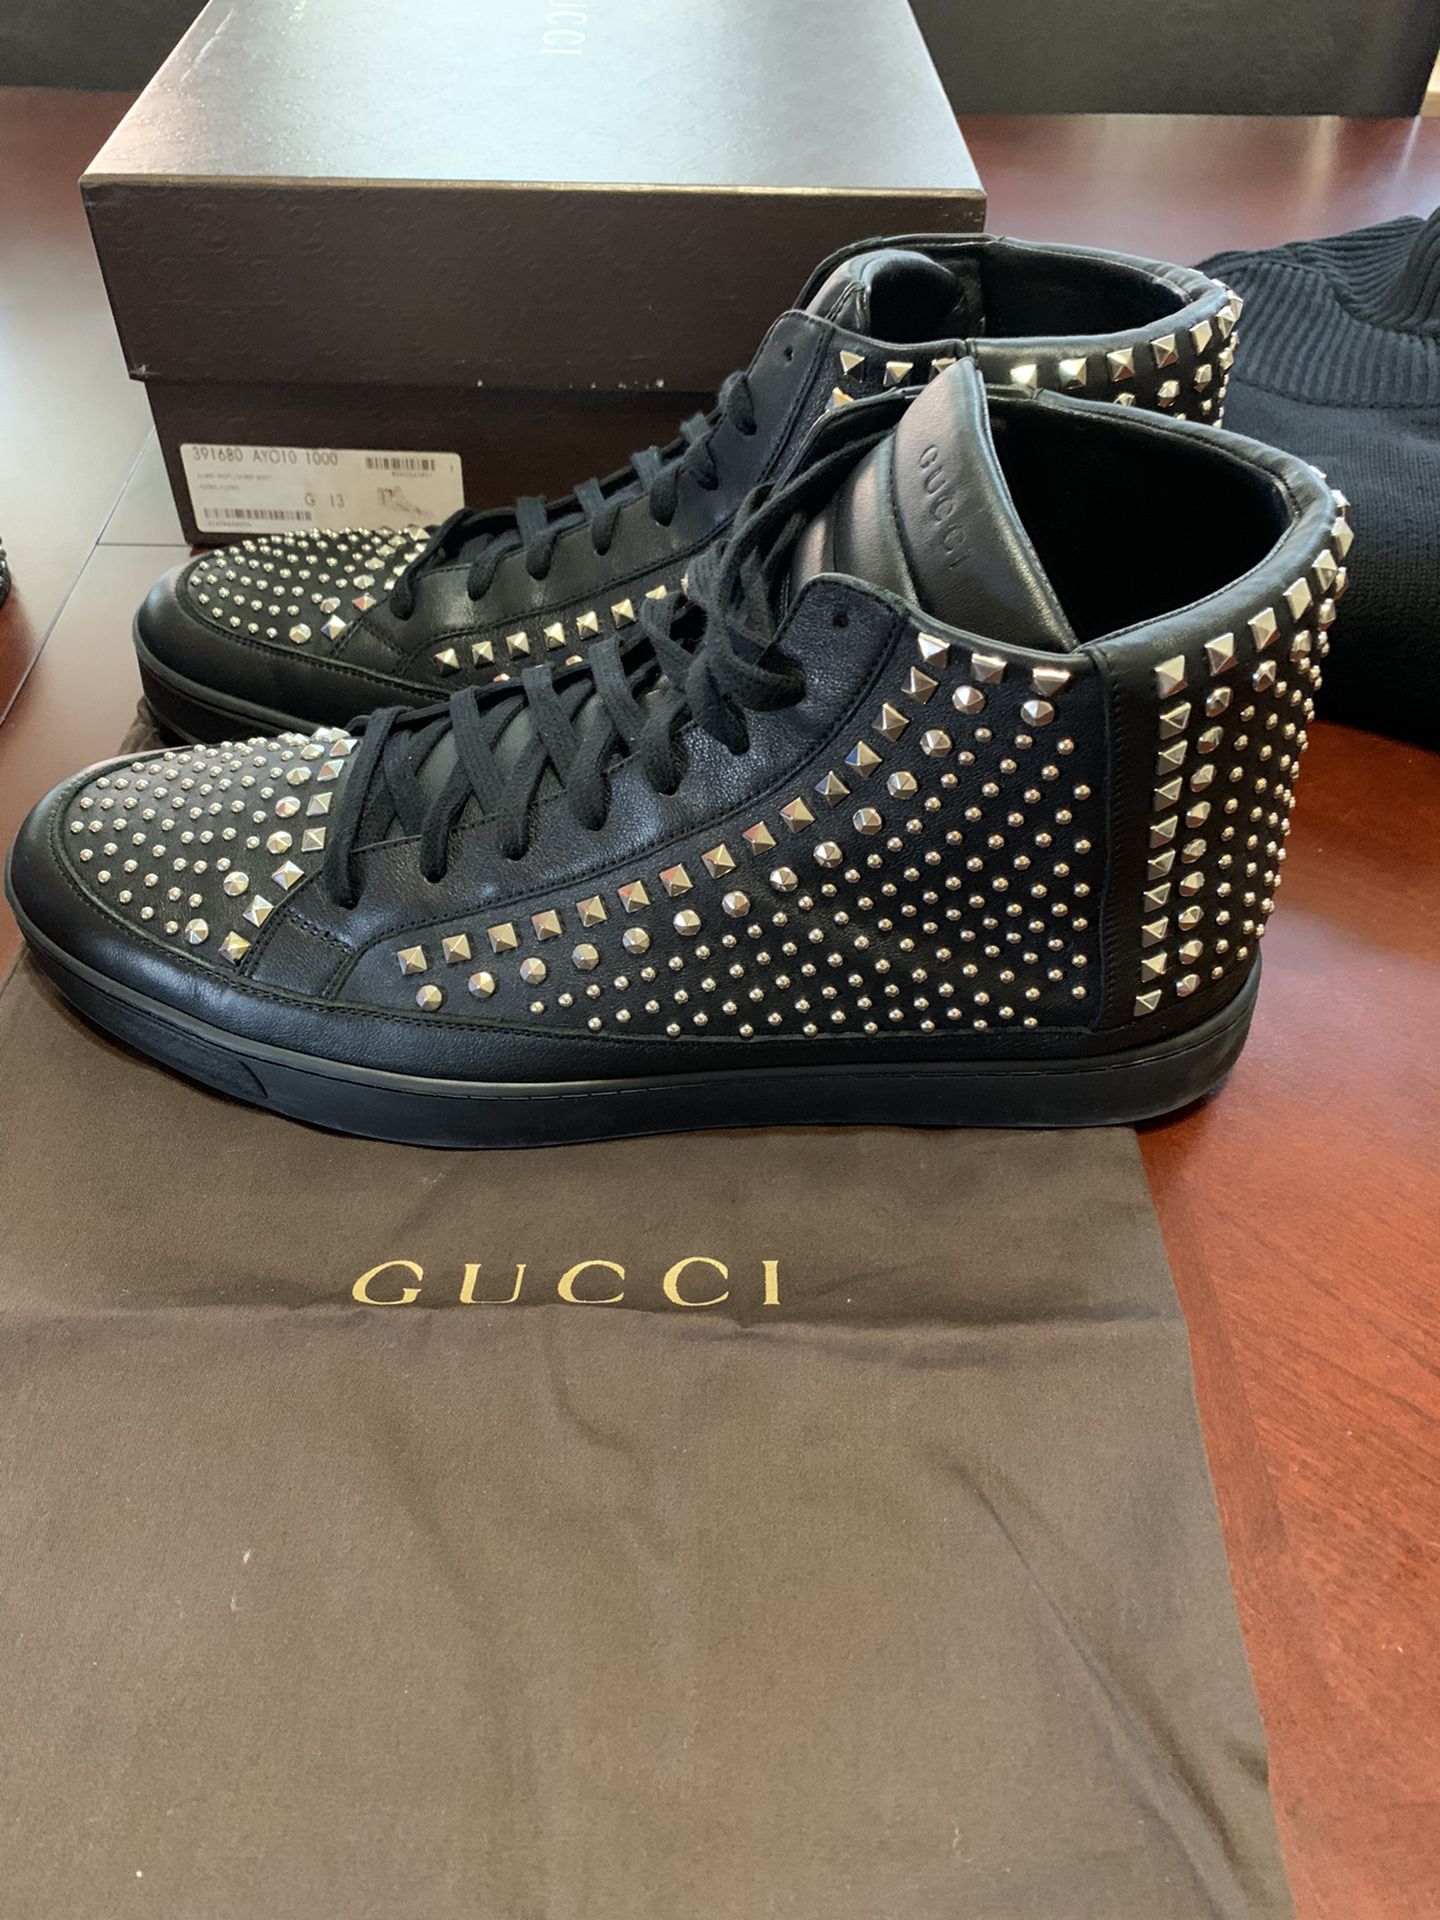 Gucci Limited Ed. Studded Hi-Top Sneakers Men's Size Gucci 13/USA 13.5